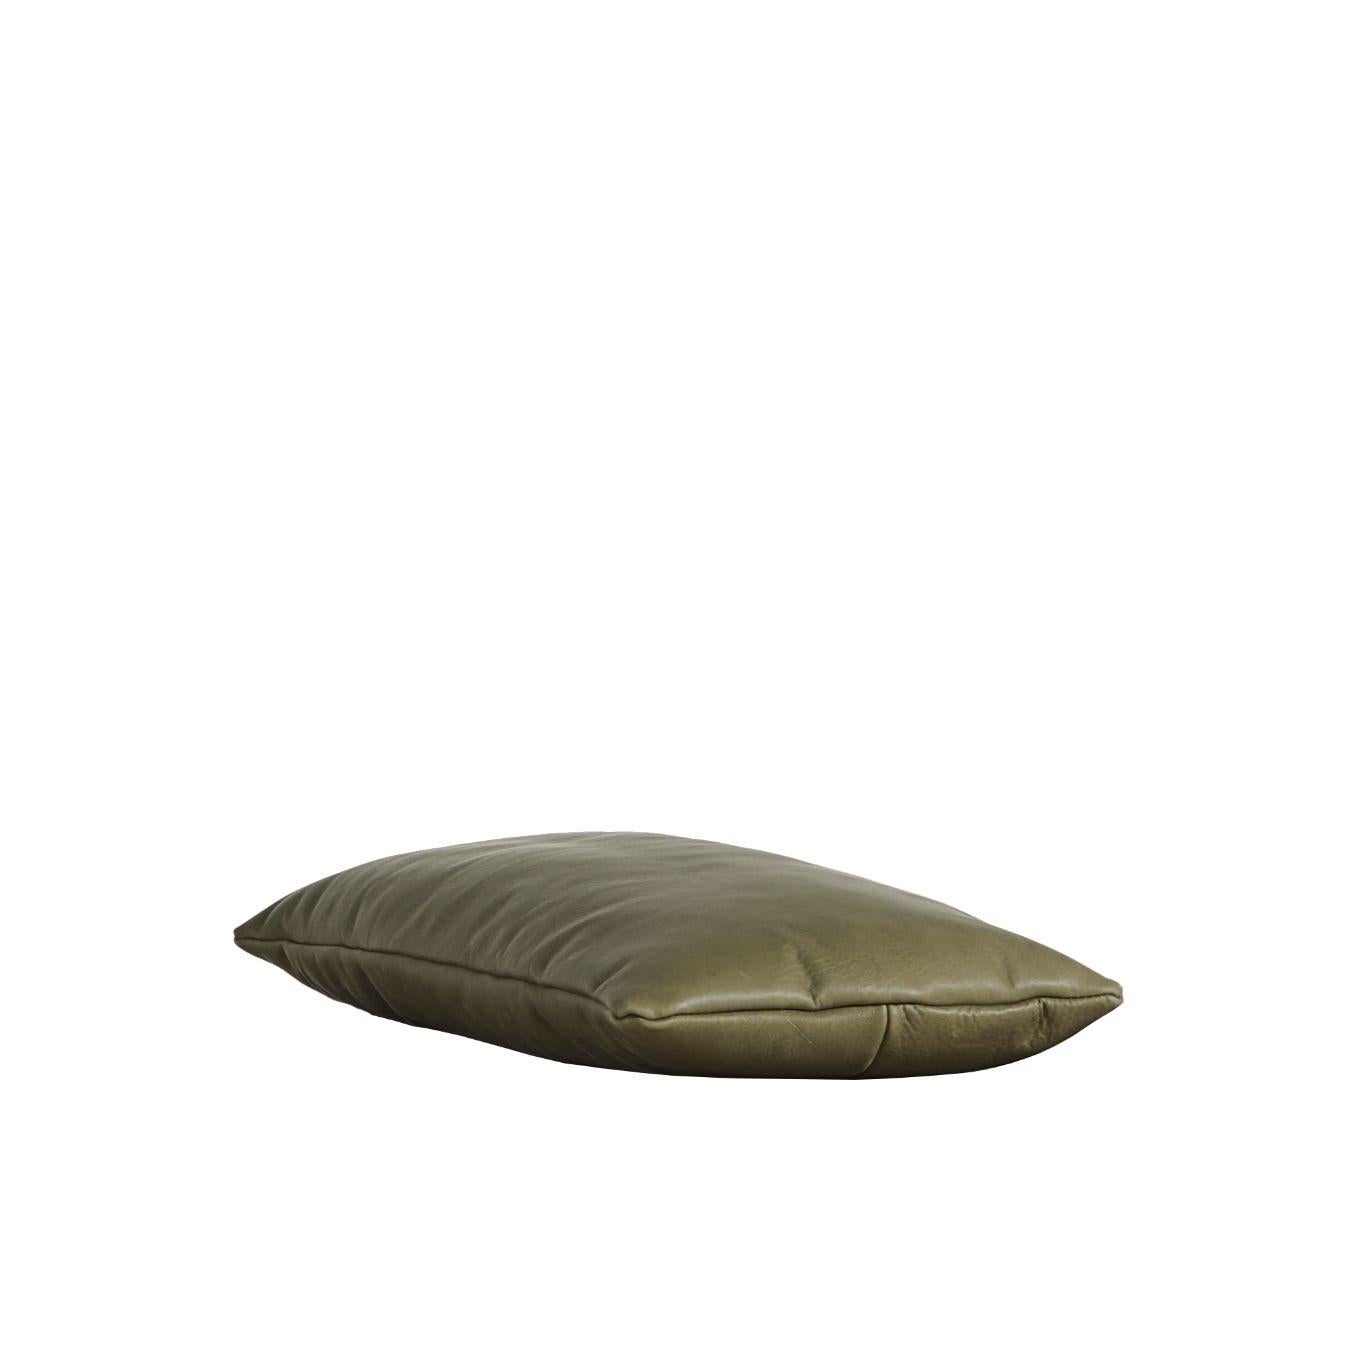 Set of 2 cognac / moss green level pillows by Msds Studio.
Materials: camo leather
Dimensions: D 23.5 x W 67 x H 8.5 cm.
Also available in different colours.

The founders, Mia and Torben Koed, decided to put their 30 years of experience into a